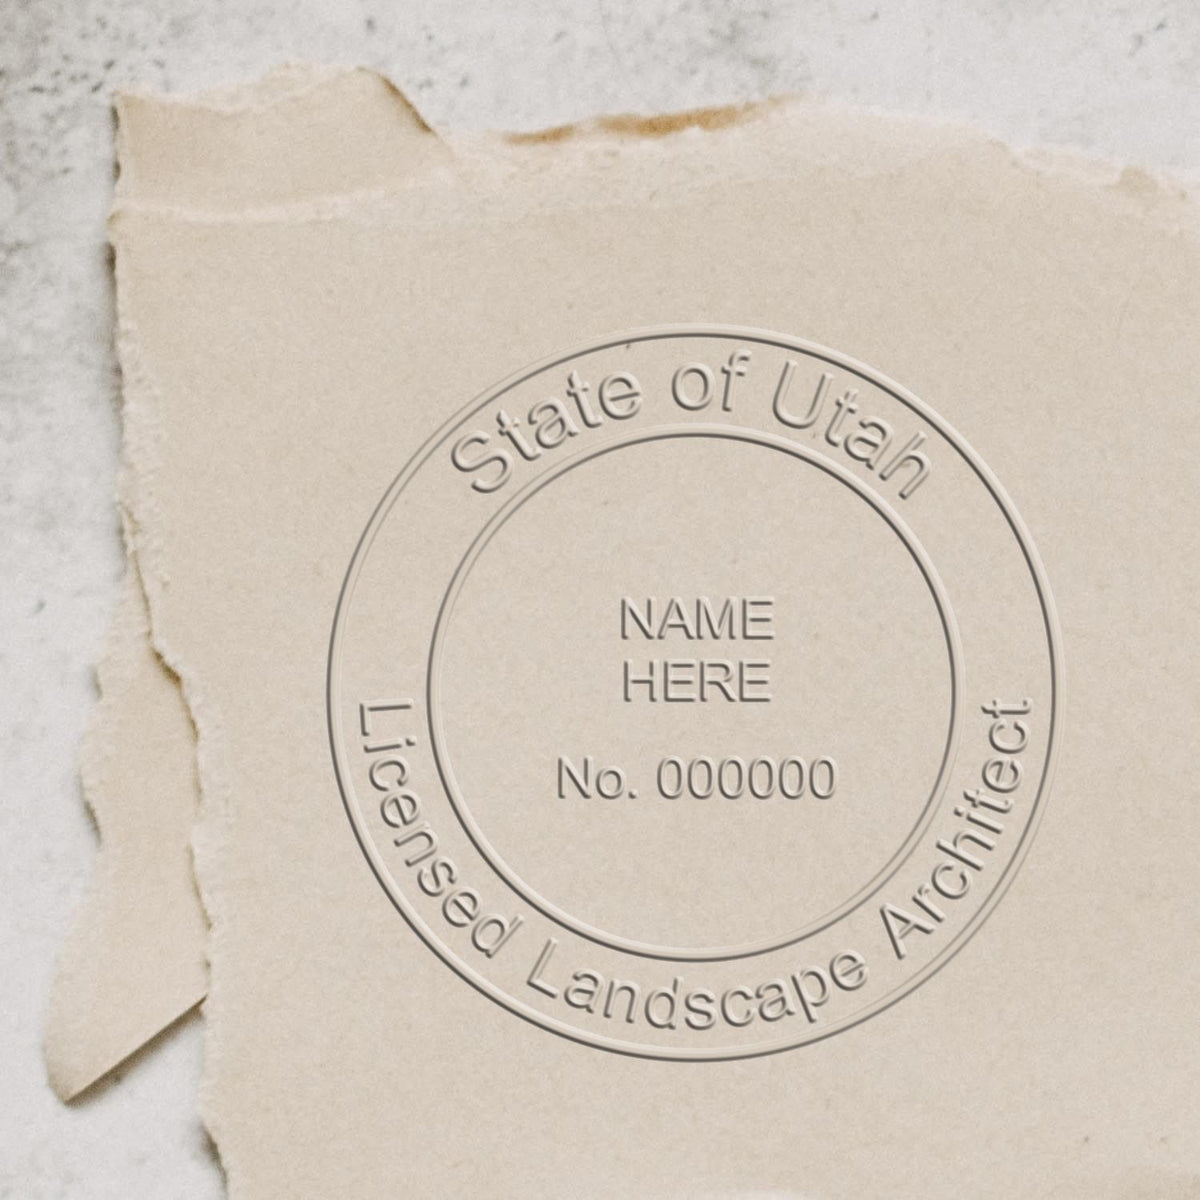 A stamped imprint of the Gift Utah Landscape Architect Seal in this stylish lifestyle photo, setting the tone for a unique and personalized product.